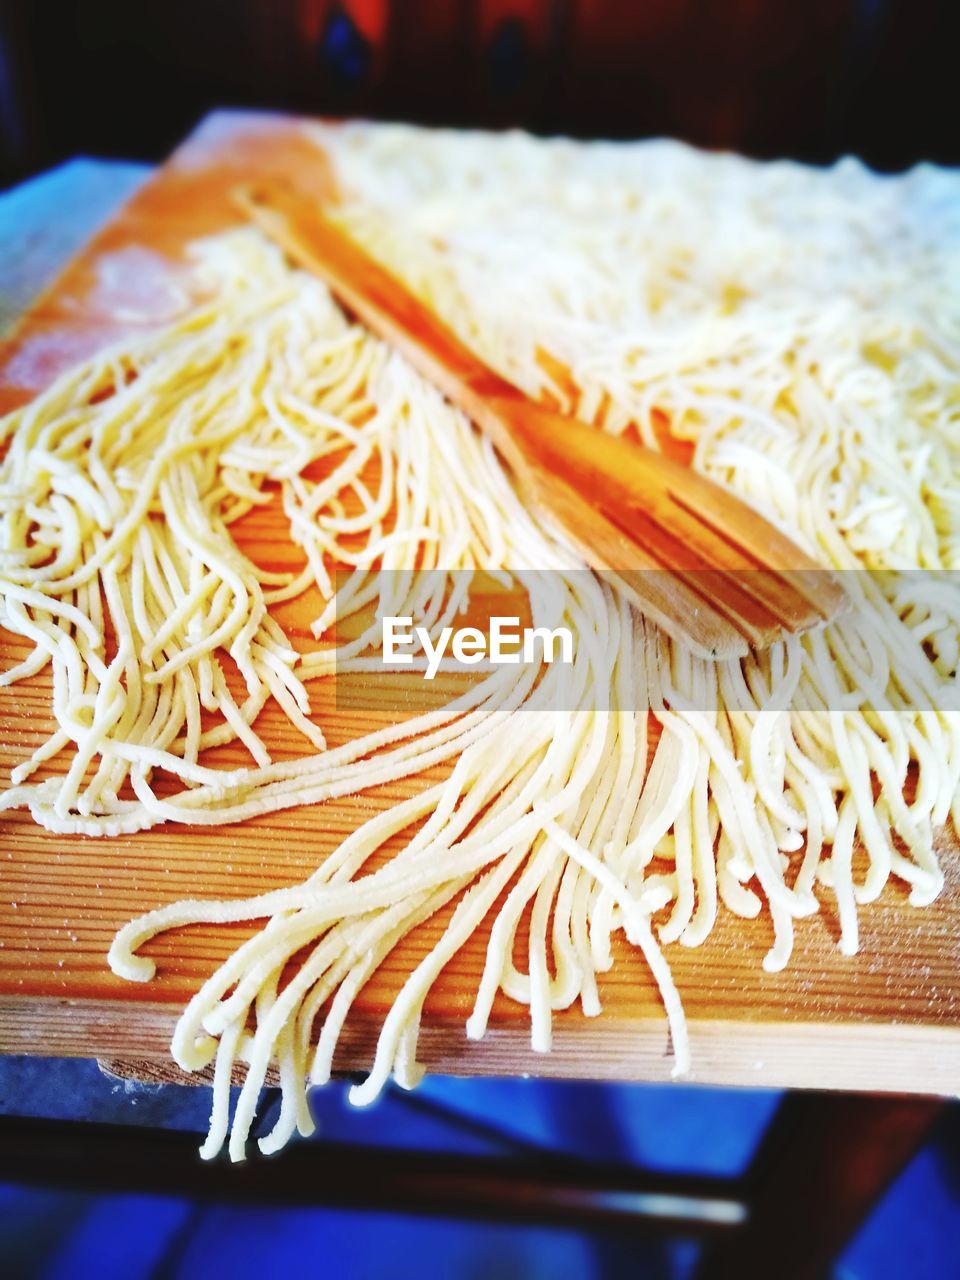 CLOSE-UP OF NOODLES IN PLATE